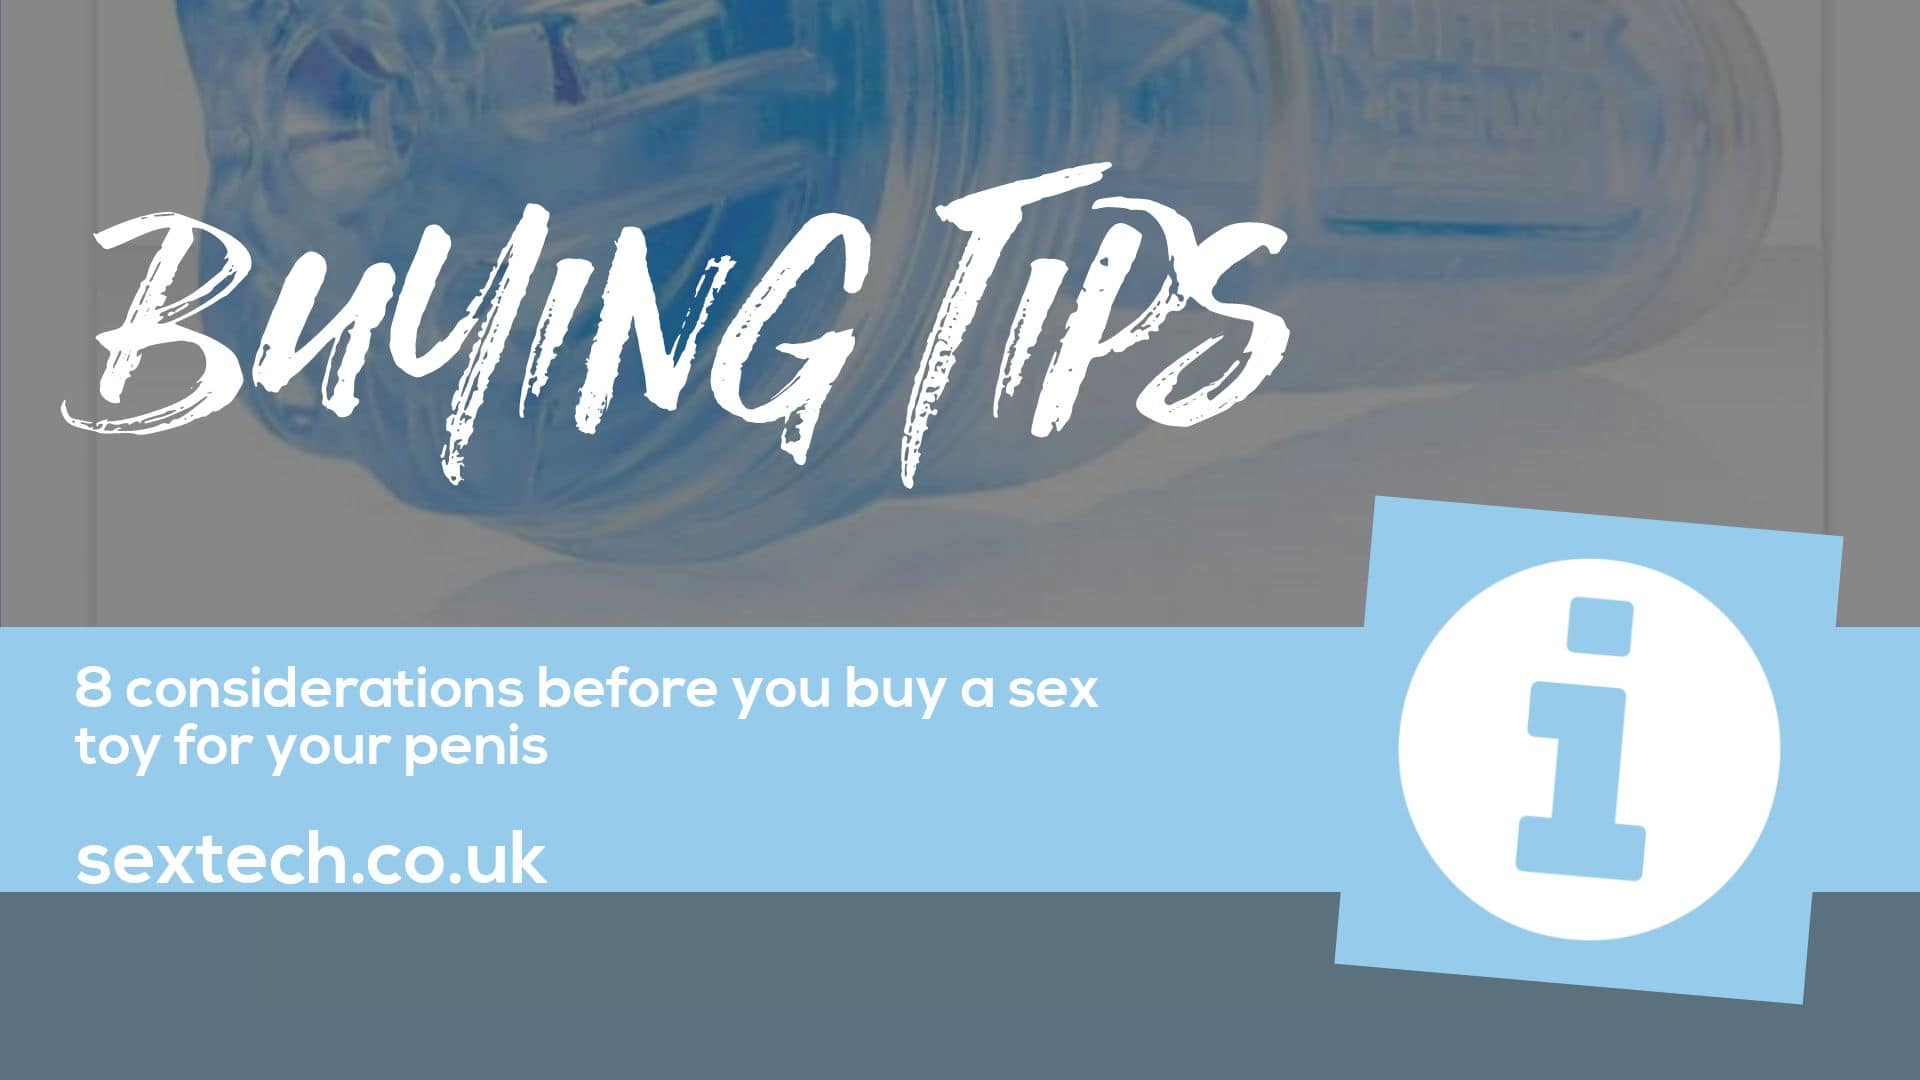 8 considerations before you buy a sex toy for your penis